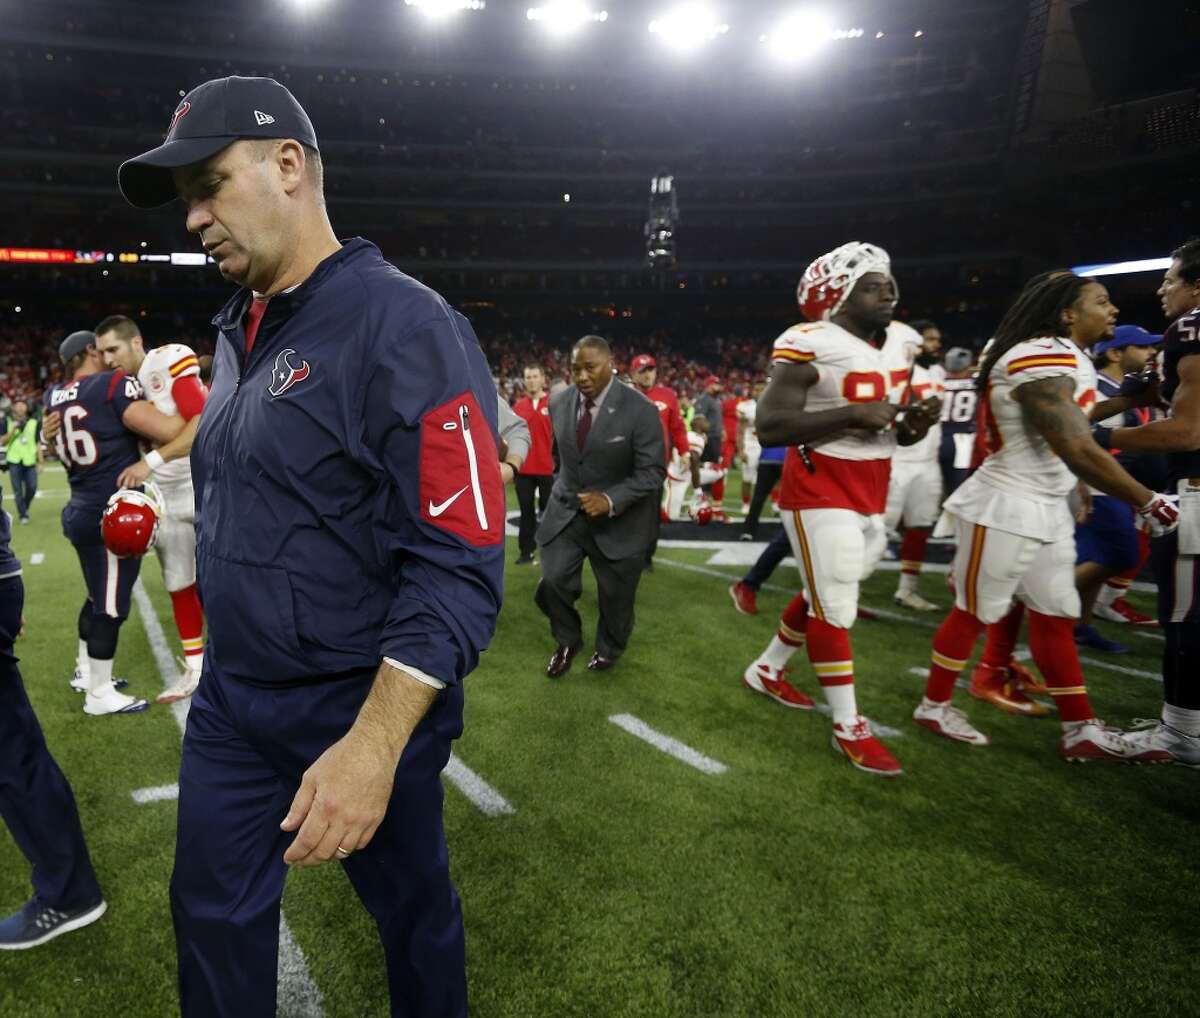 Houston Texans head coach Bill O'Brien walks back to the locker room after the Texans loss to Kansas City Chiefs 30-0 after an AFC Wildcard playoff game at NRG Stadium on Saturday, Jan. 9, 2016, in Houston. ( Karen Warren / Houston Chronicle )